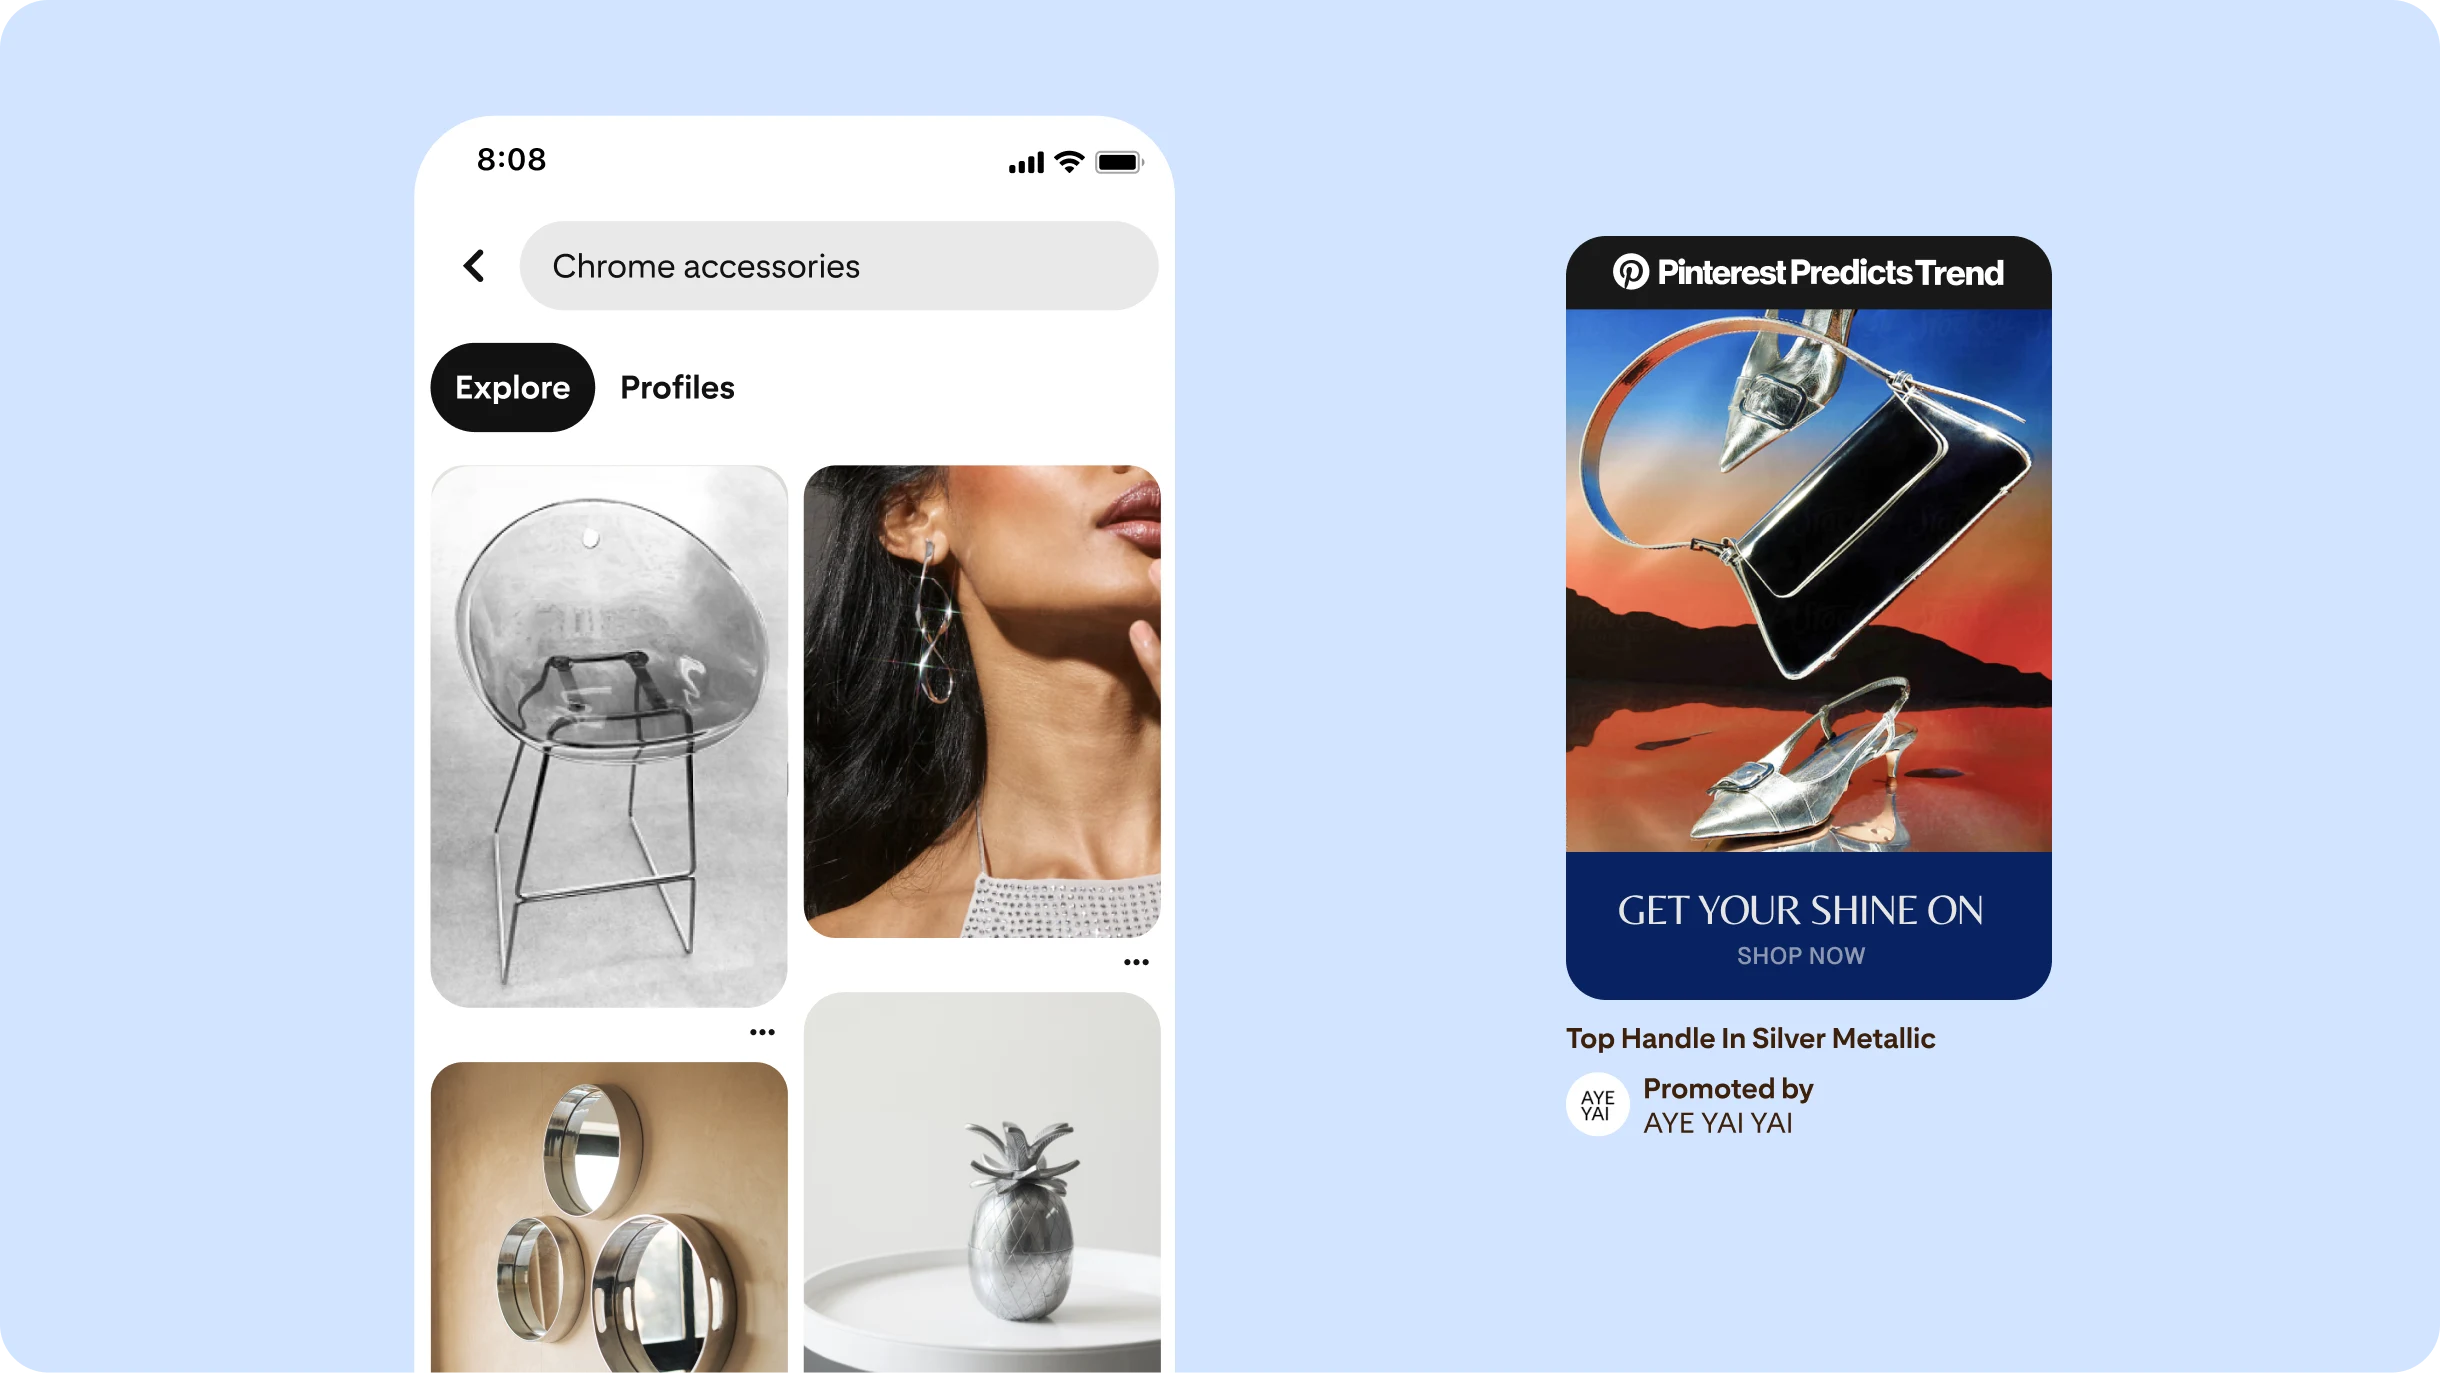 An image of the Pinterest home feed with ‘Chrome accessories’ written in the search bar in the top left, with several Pins below featuring chrome accessories and furniture. On the right, a Pin-shaped ad reads ‘Get your shine on’.